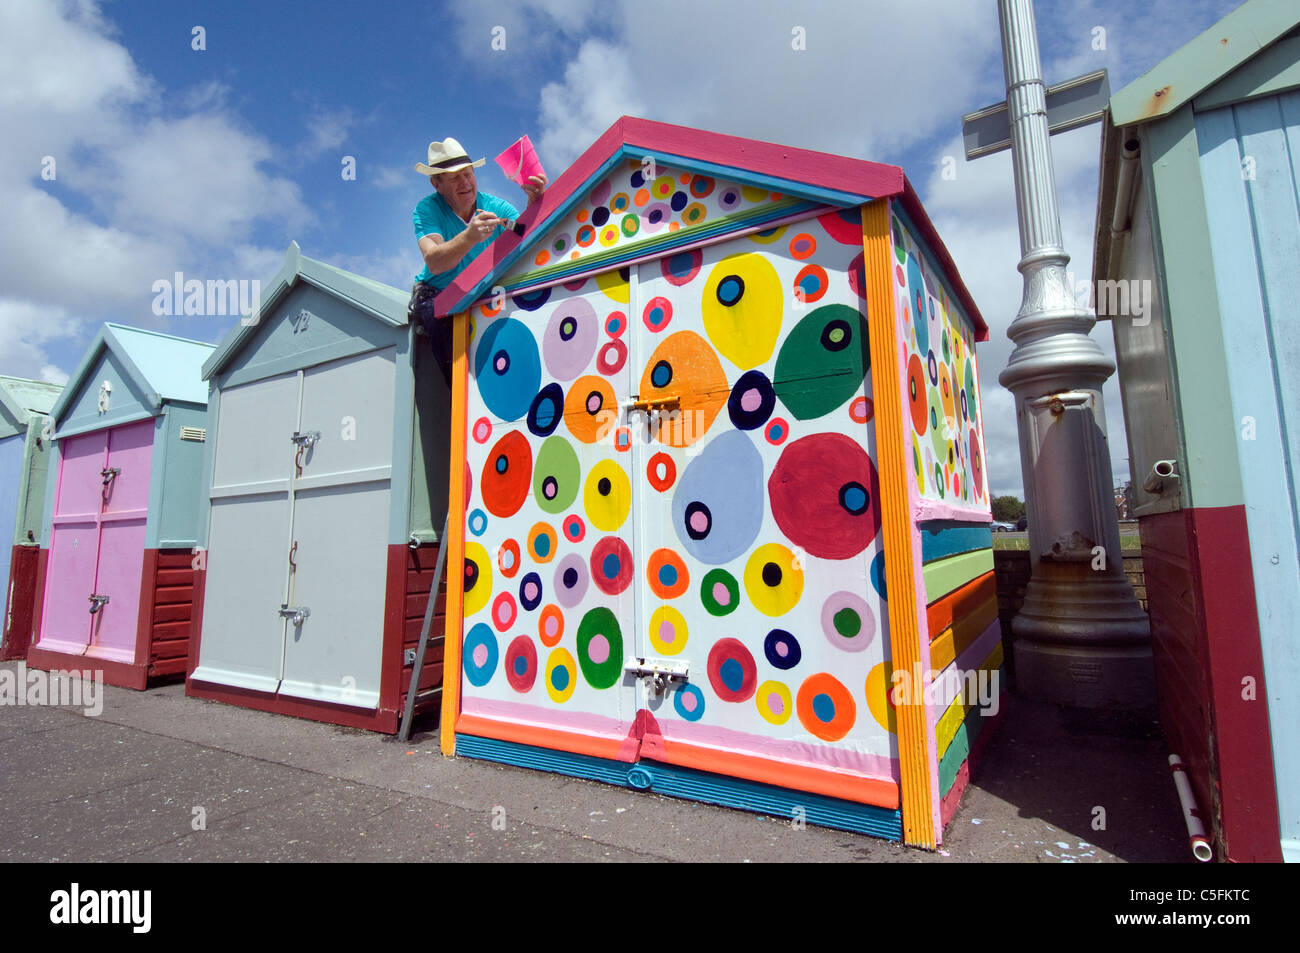 A middle aged man defying he rules and painting his Brighton beach hut in non-regulation colourful spots. Stock Photo